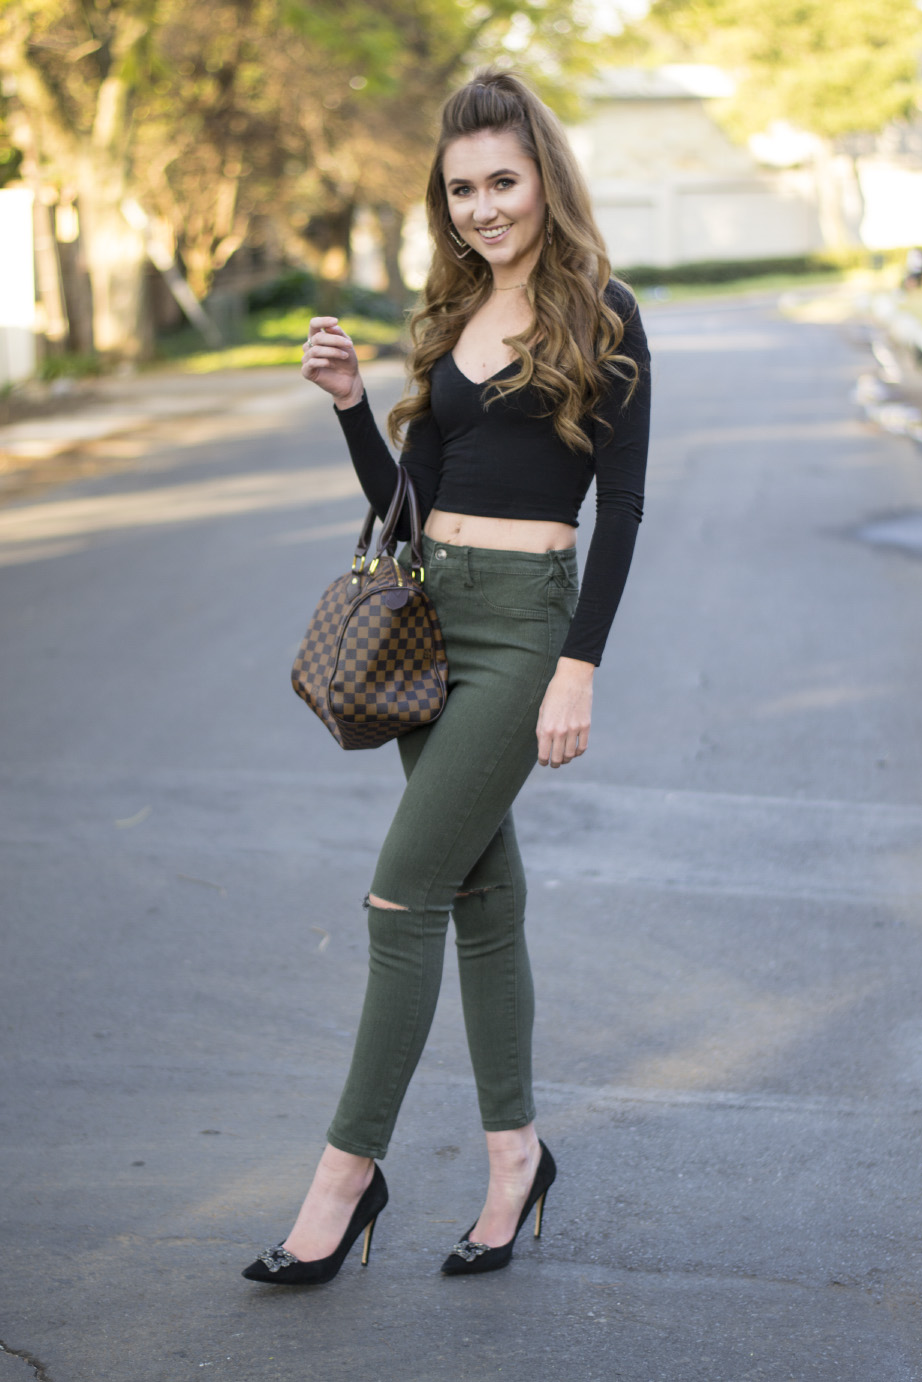 How to Style Crop Tops - Cute Crop Top Outfits Ideas | Beyoung Blog